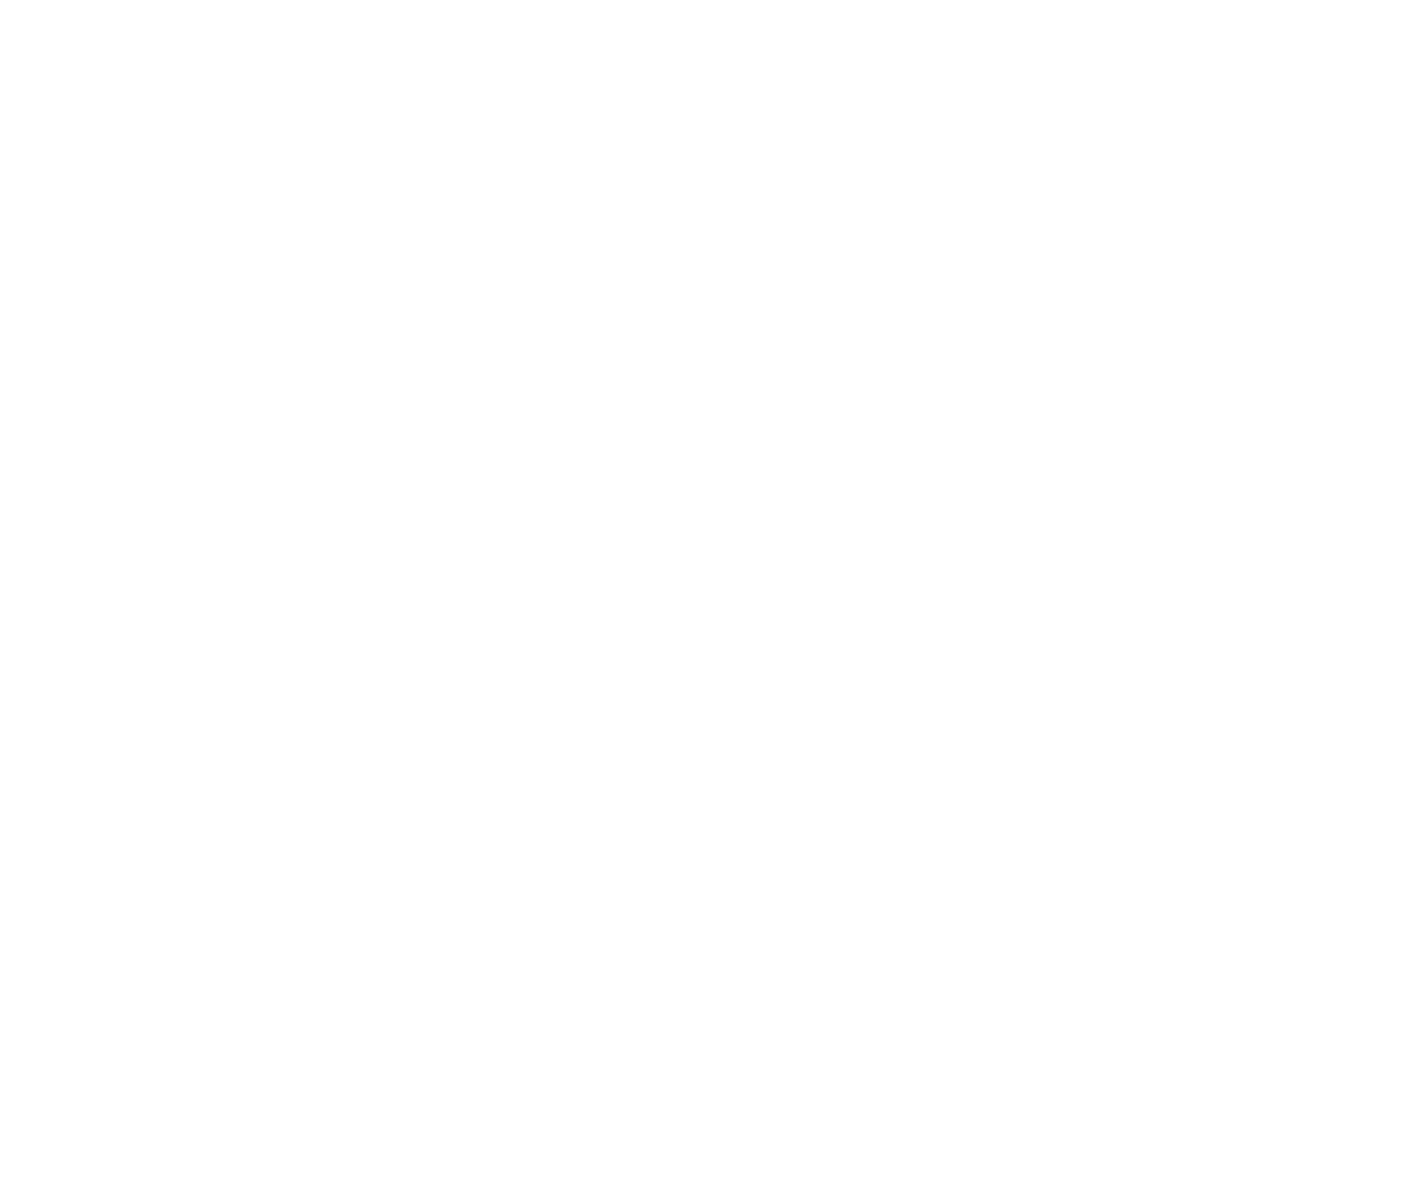 The Week Independent Schools Guide 2018 -  Great for Music